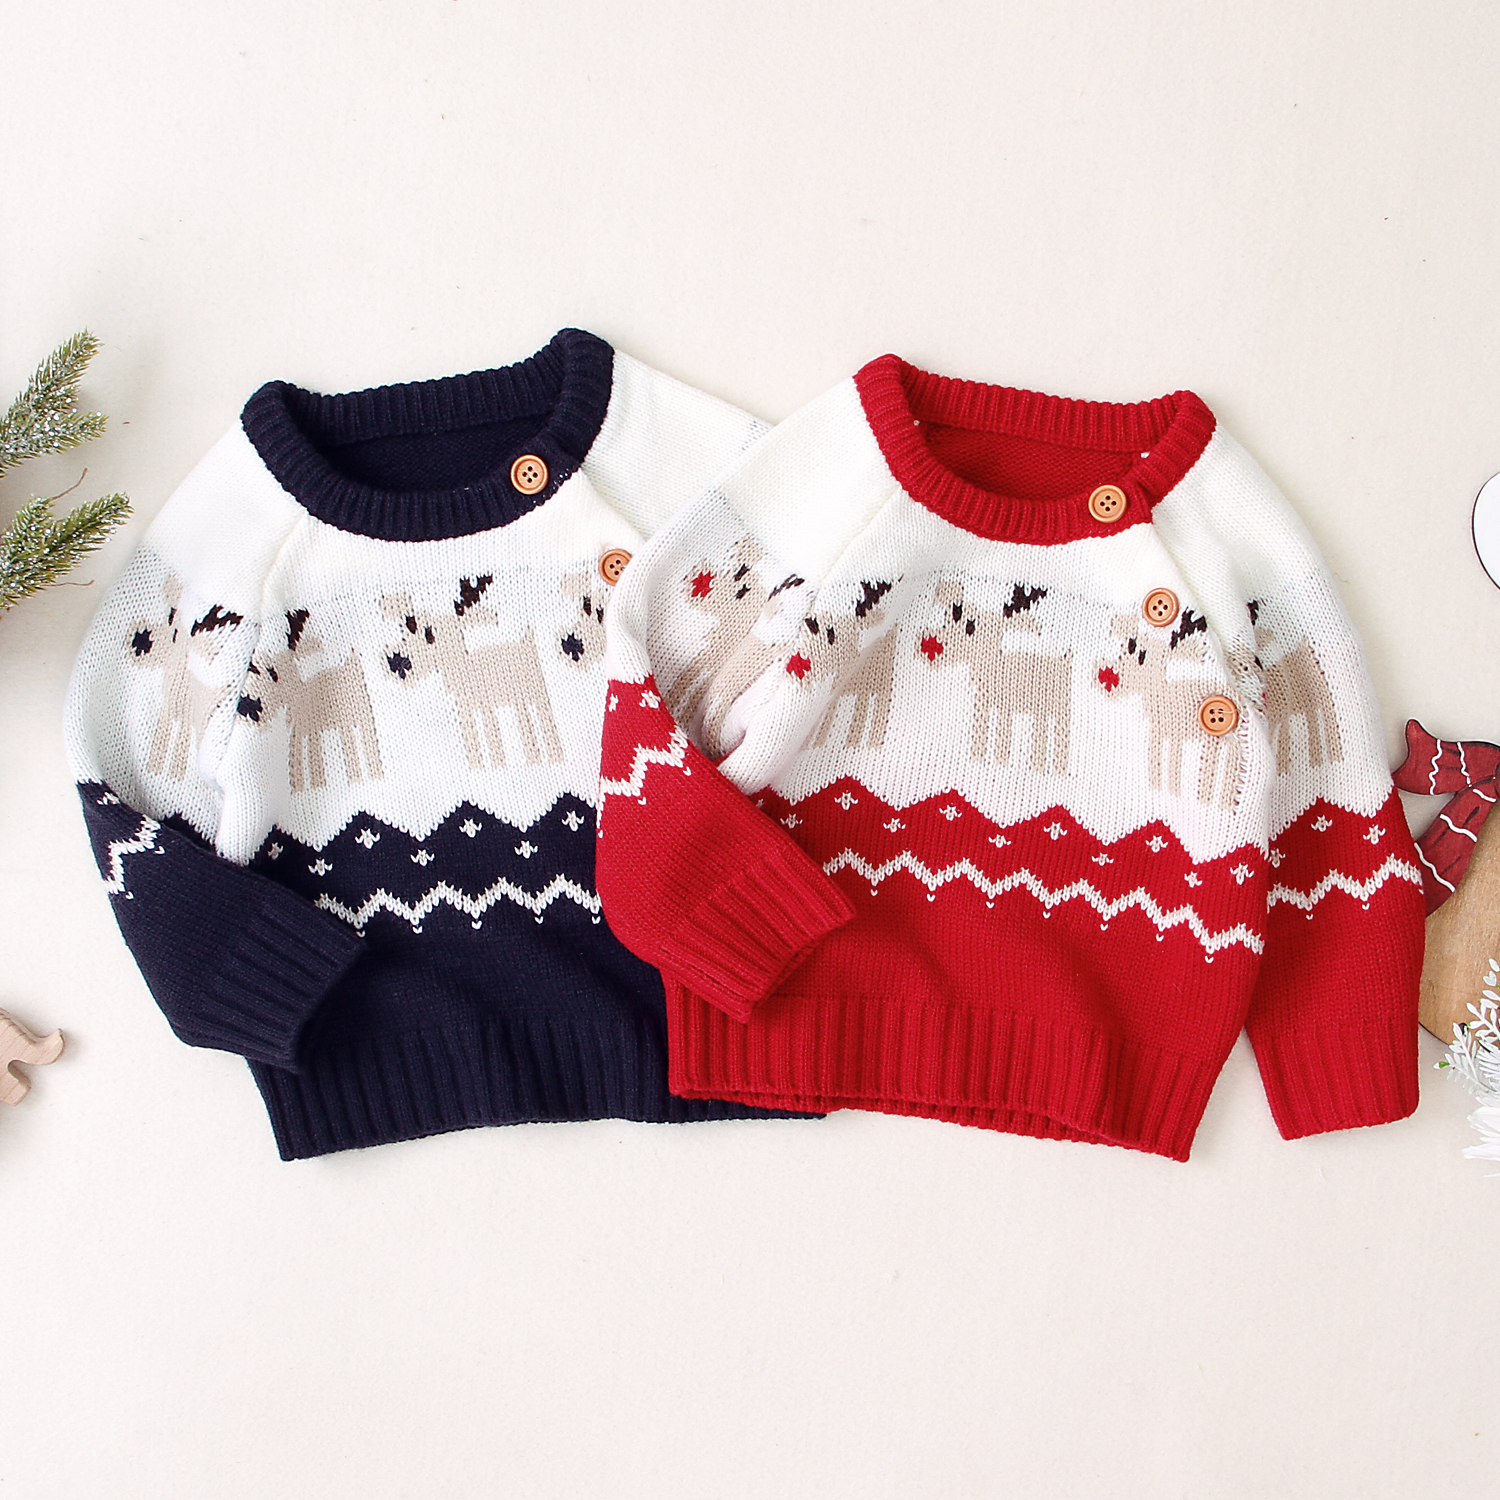 Ma&Baby 0-18M Christmas Newborn Infant Baby Boy Girl Knitted Sweaters Autumn Winter Warm Long Sleeve Deer Top Xmas Baby Clothing